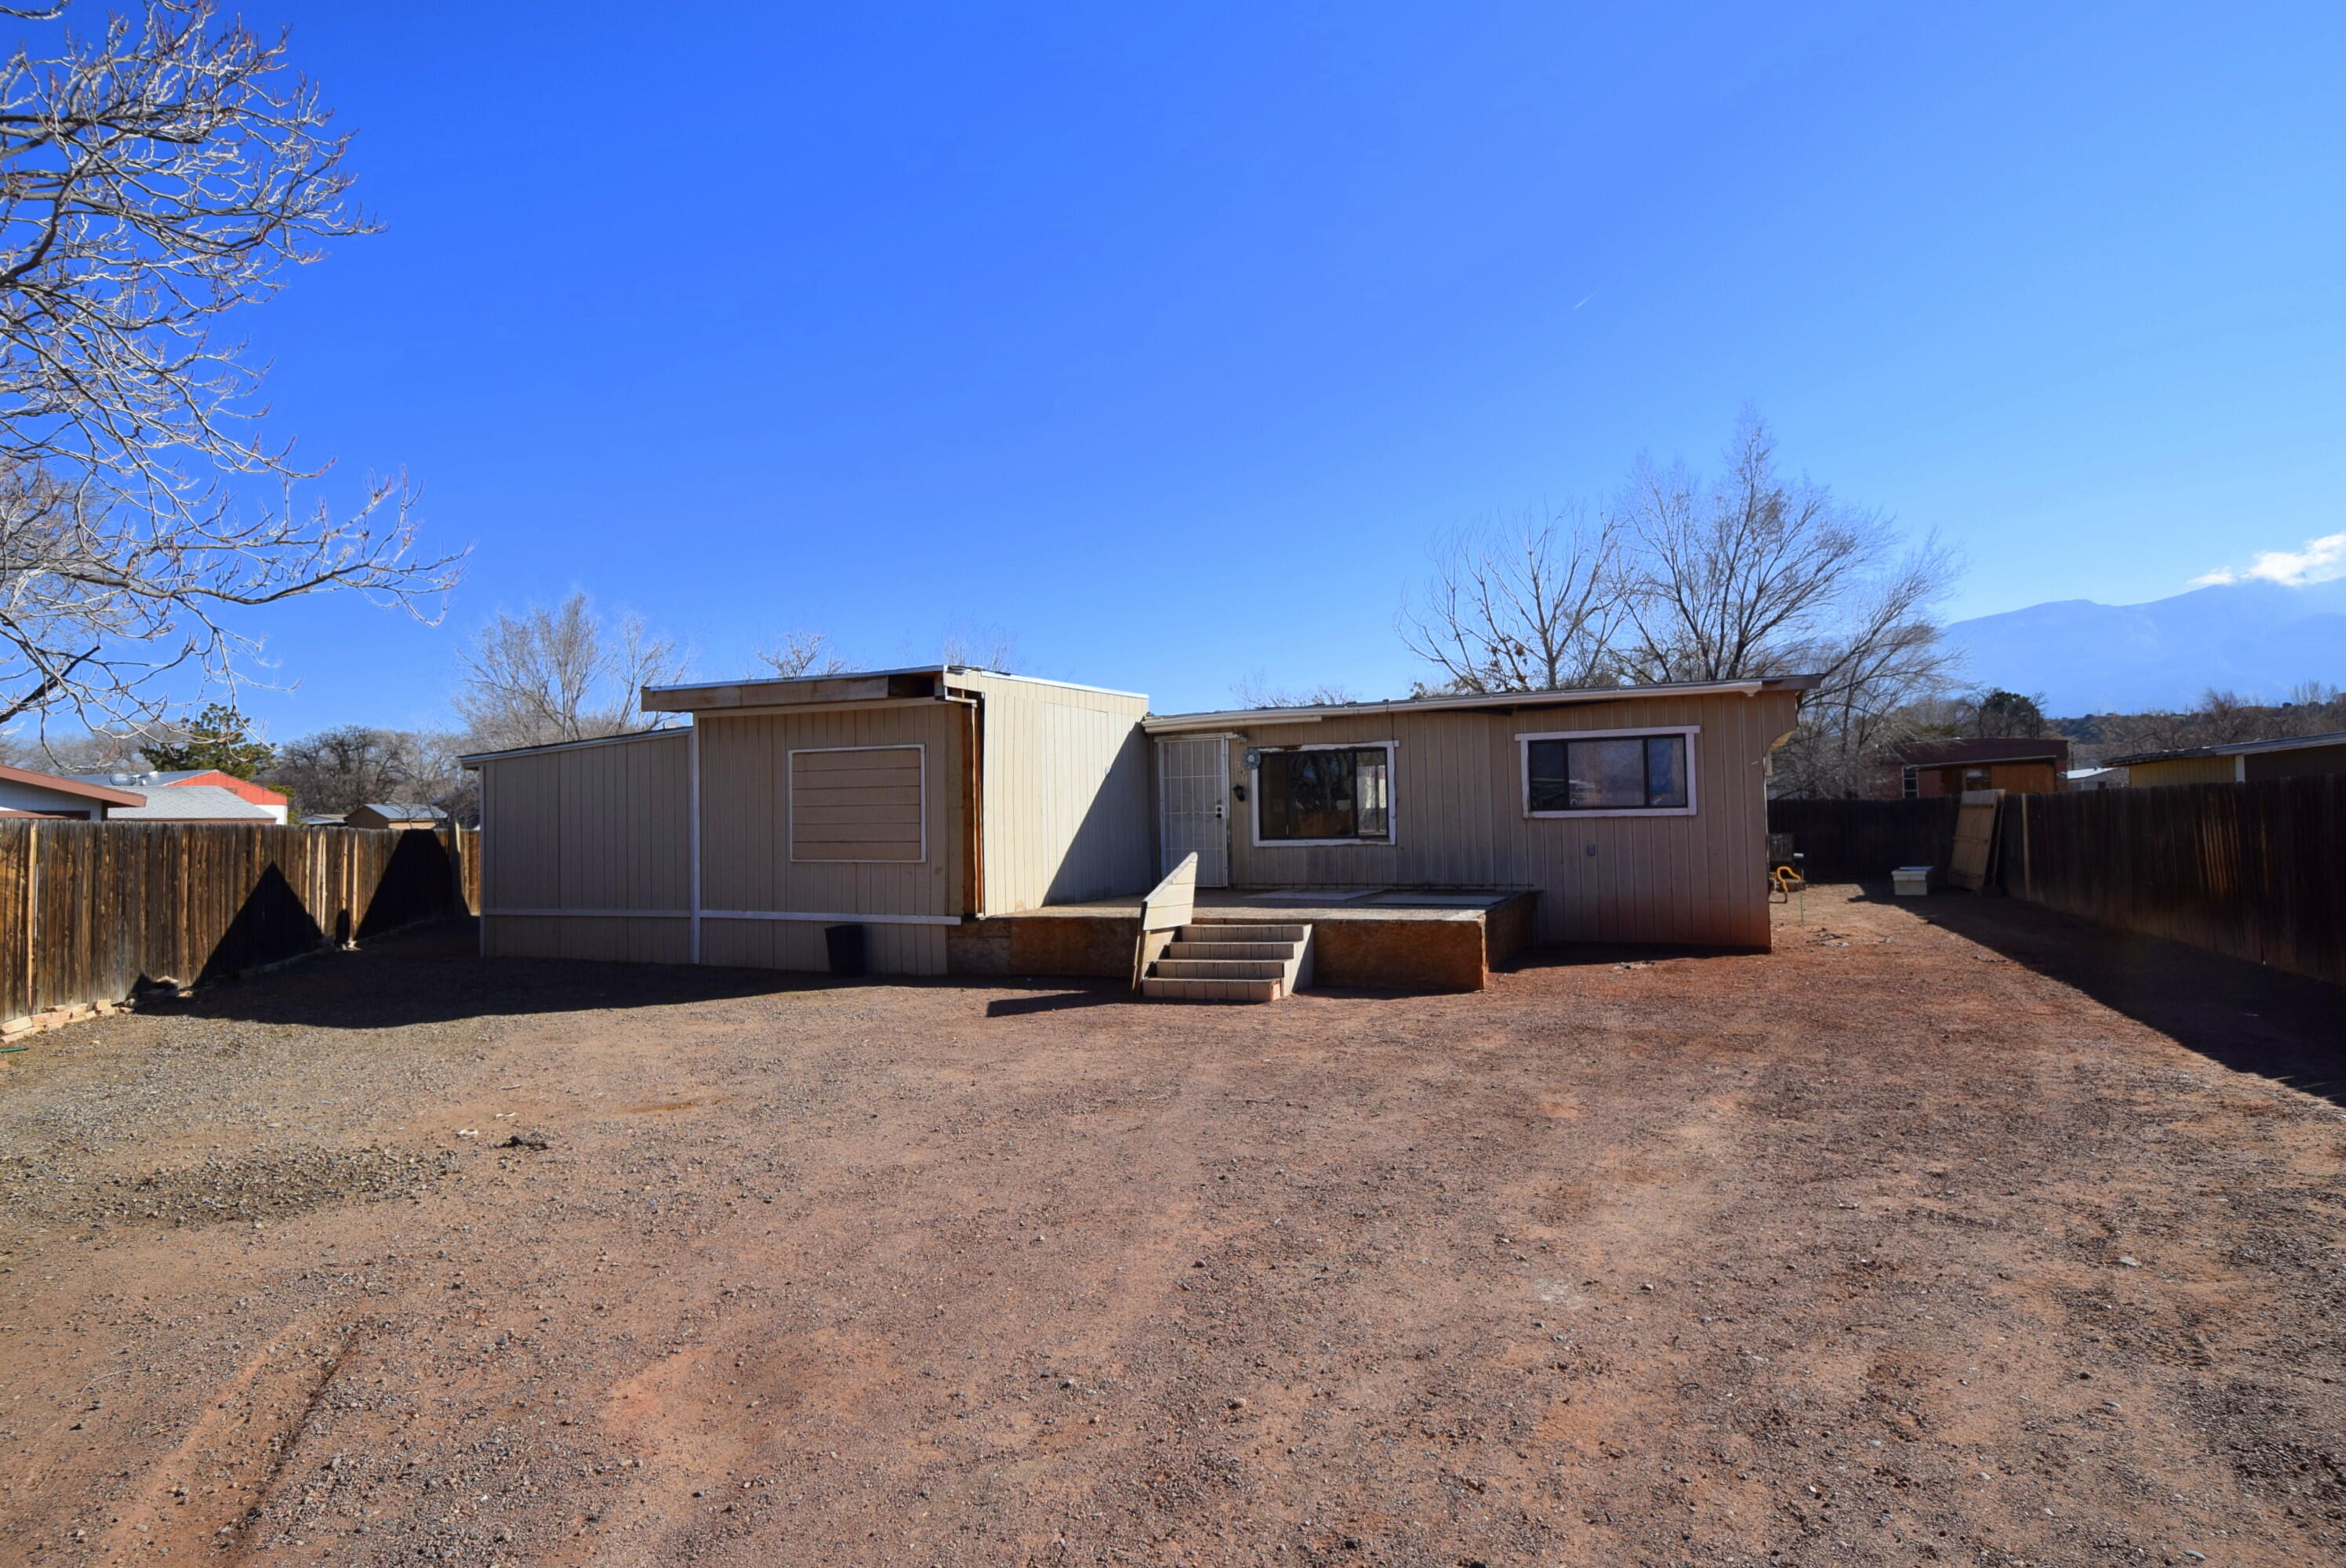 Manufactured home that needs some TLC. Could be a residence, investment, or tear it down a build a custom home. Close to the Rail Runner, parks, downtown Bernalillo. Great freeway access. Own it today